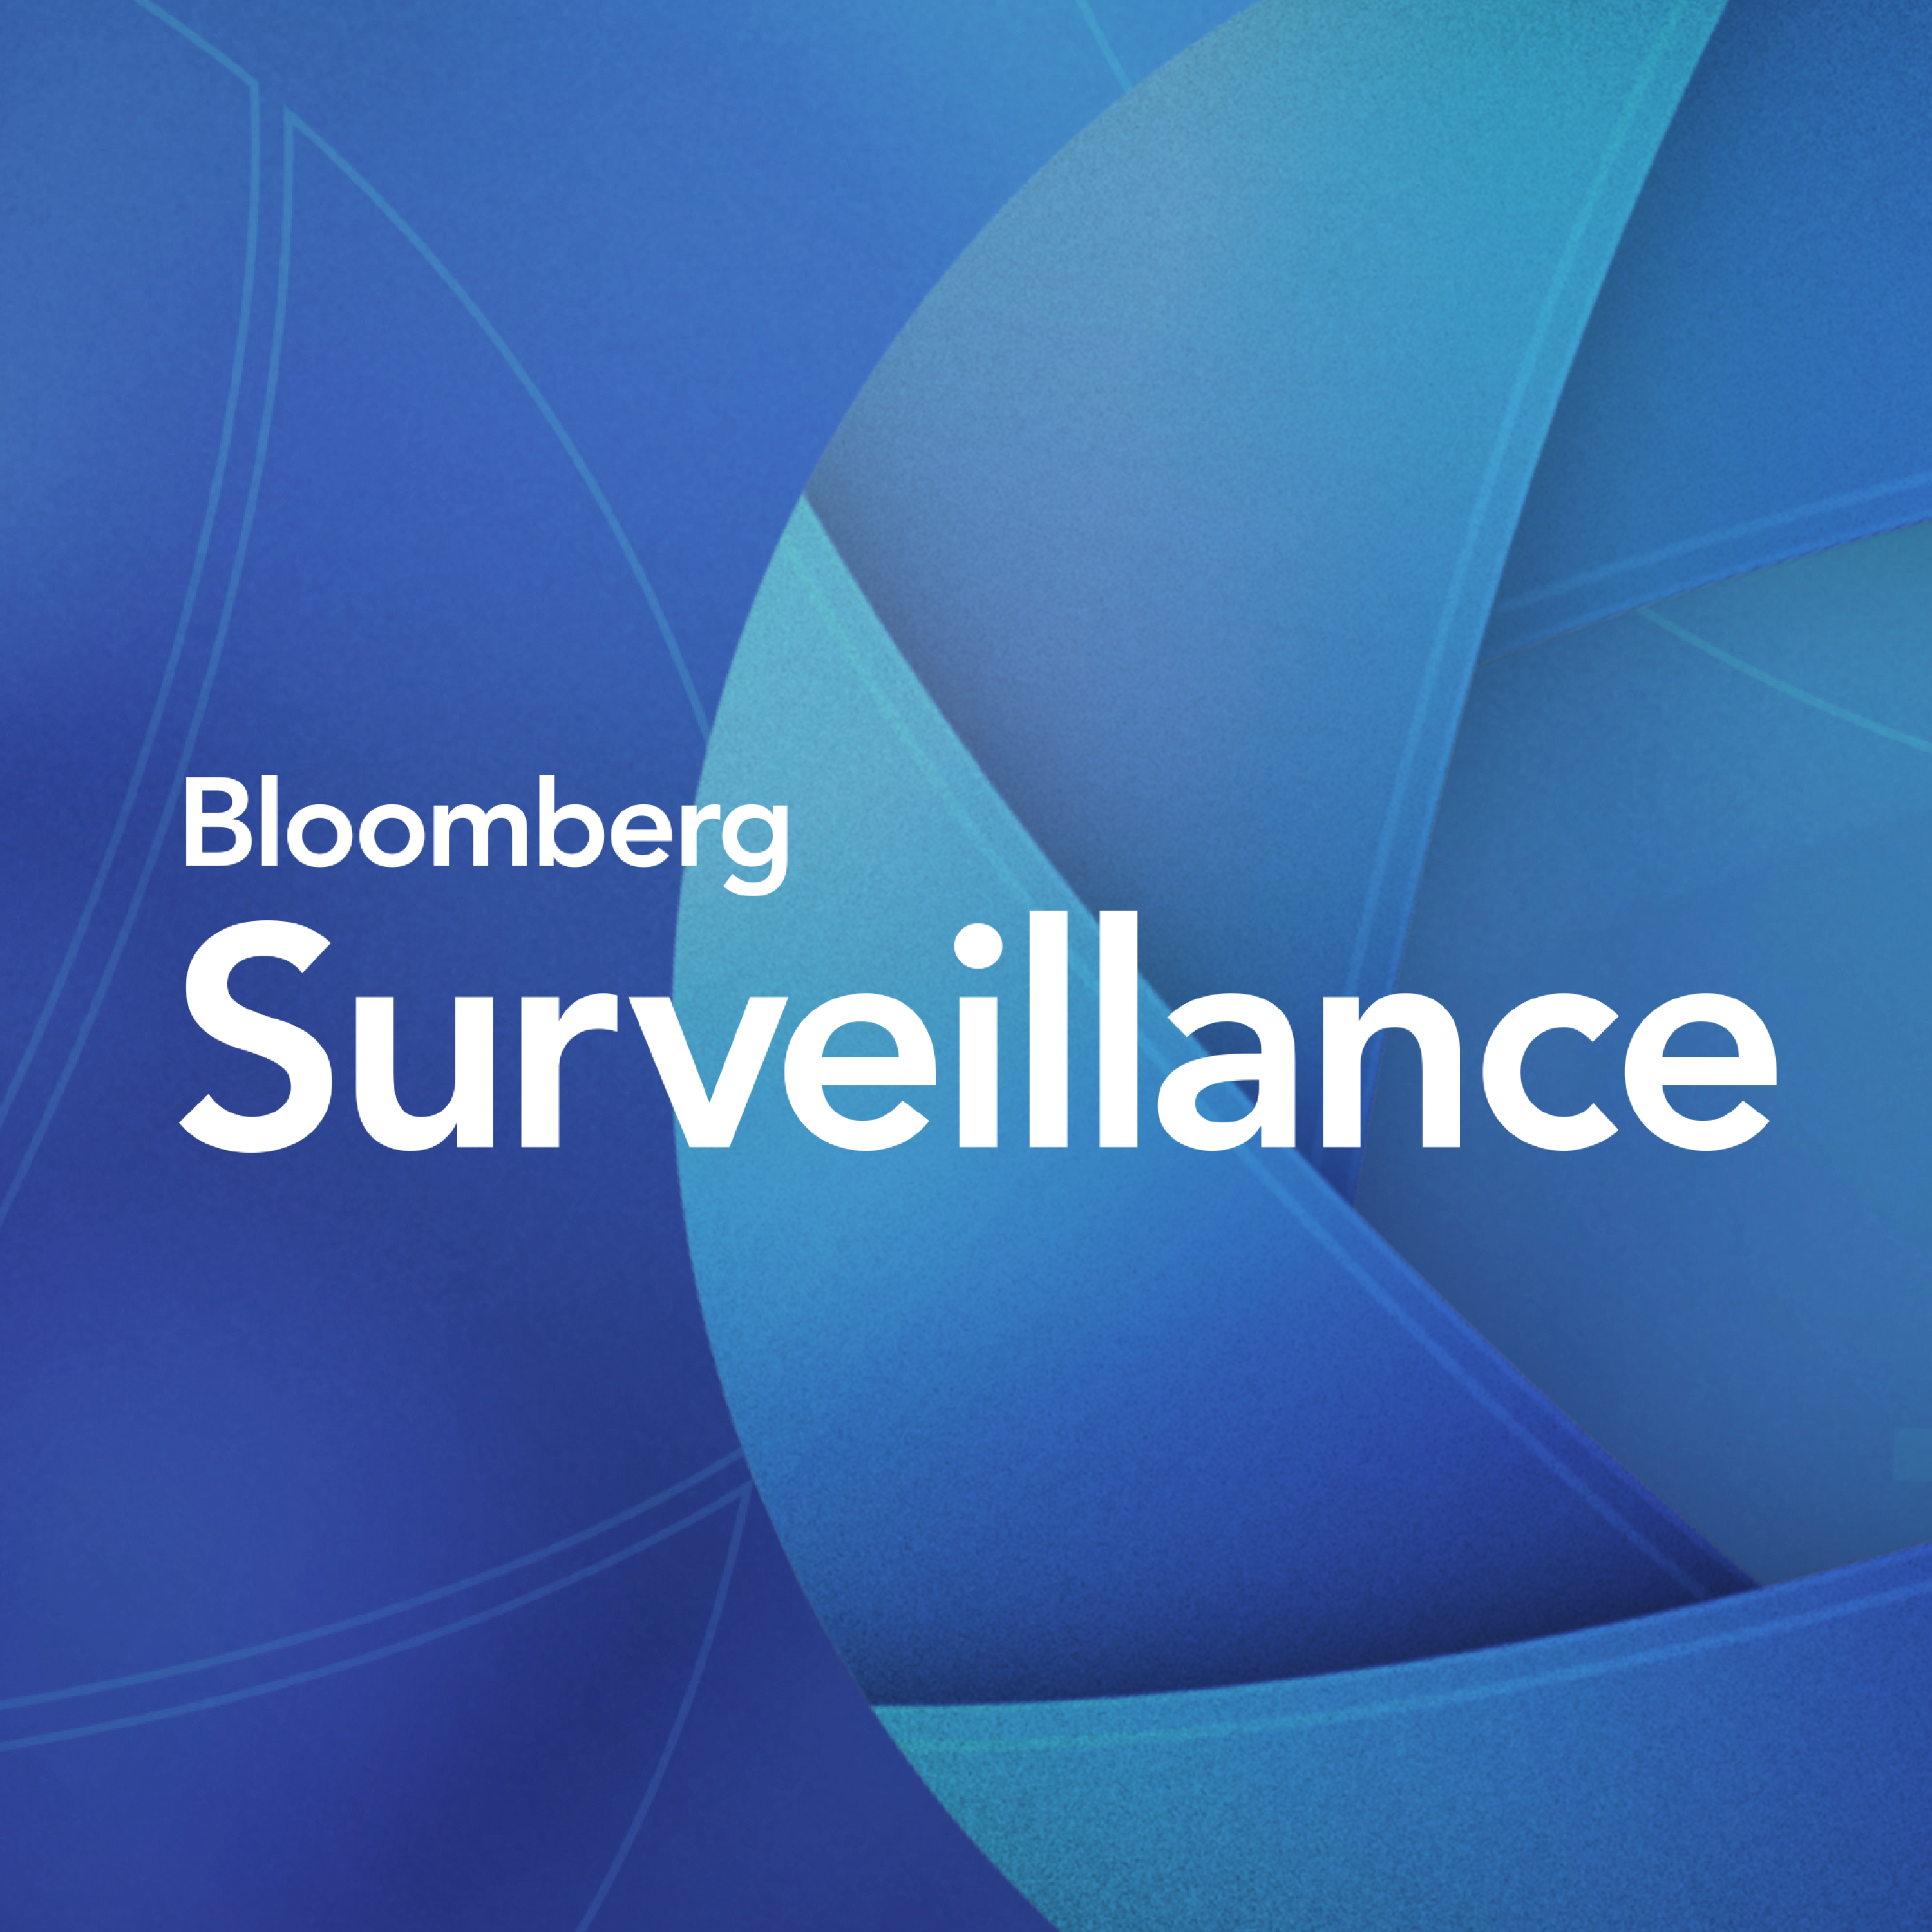 Surveillance: Economy Weighs on Midterms